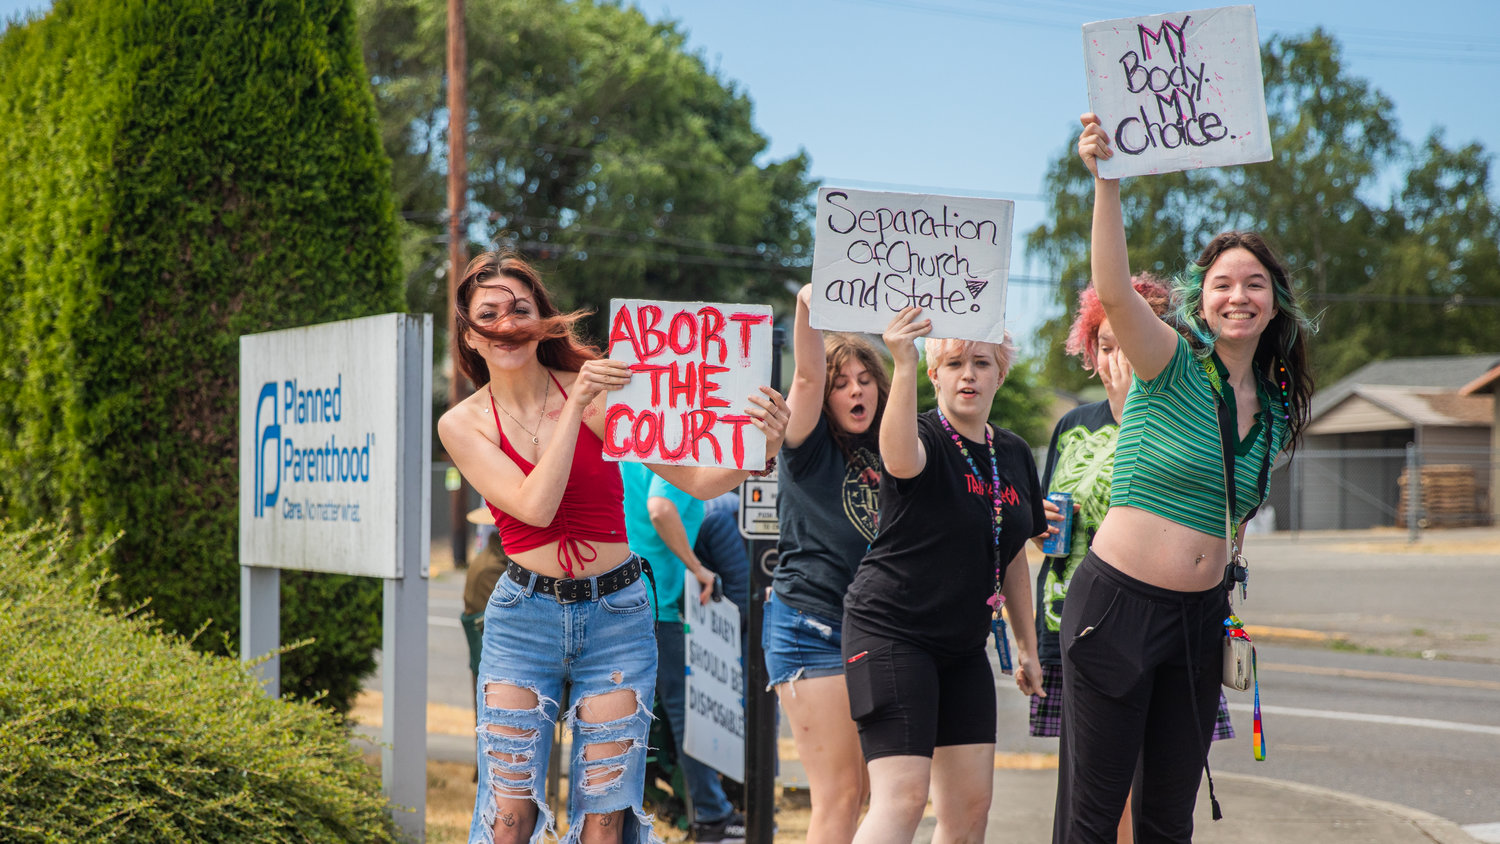 Demonstrators hold signs advocating for abortion rights outside Planned Parenthood in Centralia alongside other  anti-abortion advocates Friday afternoon.